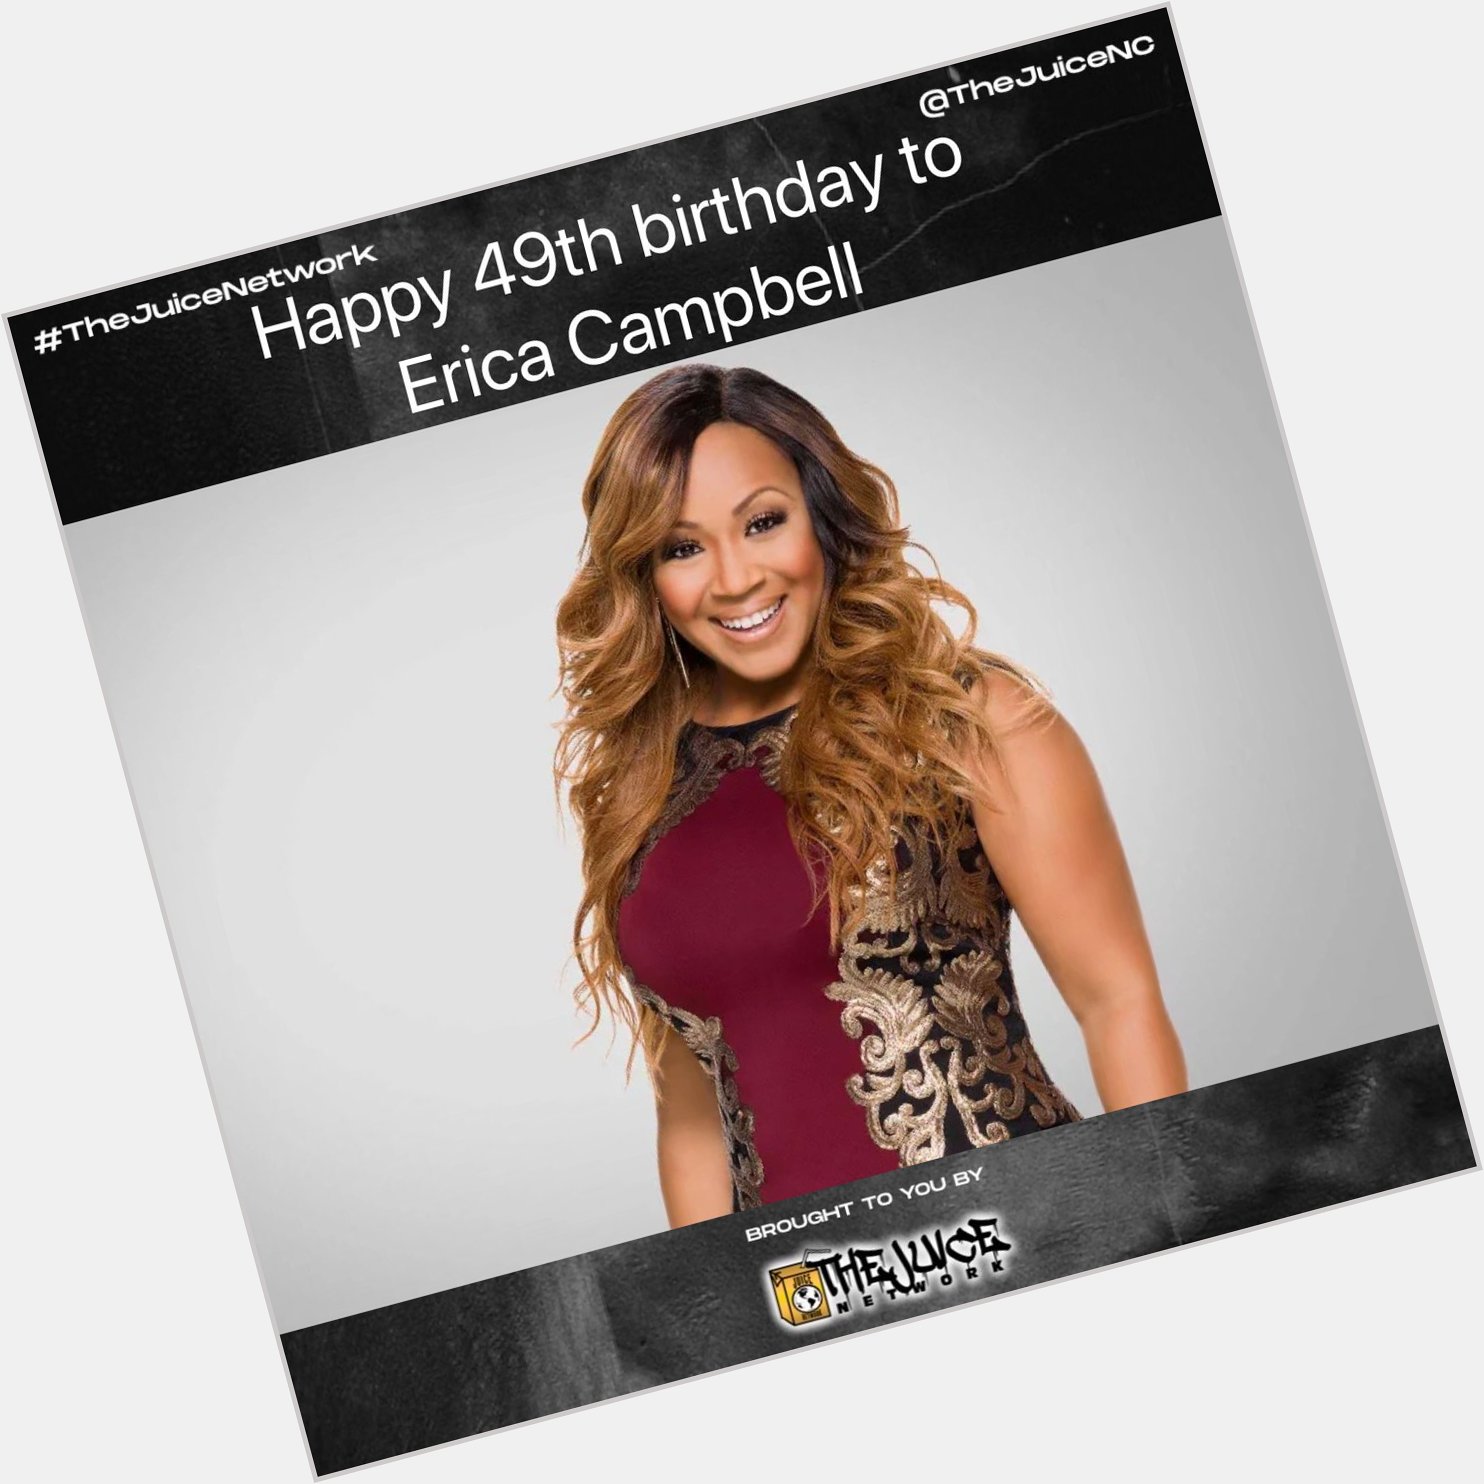 Happy 49th birthday to Erica Campbell!    